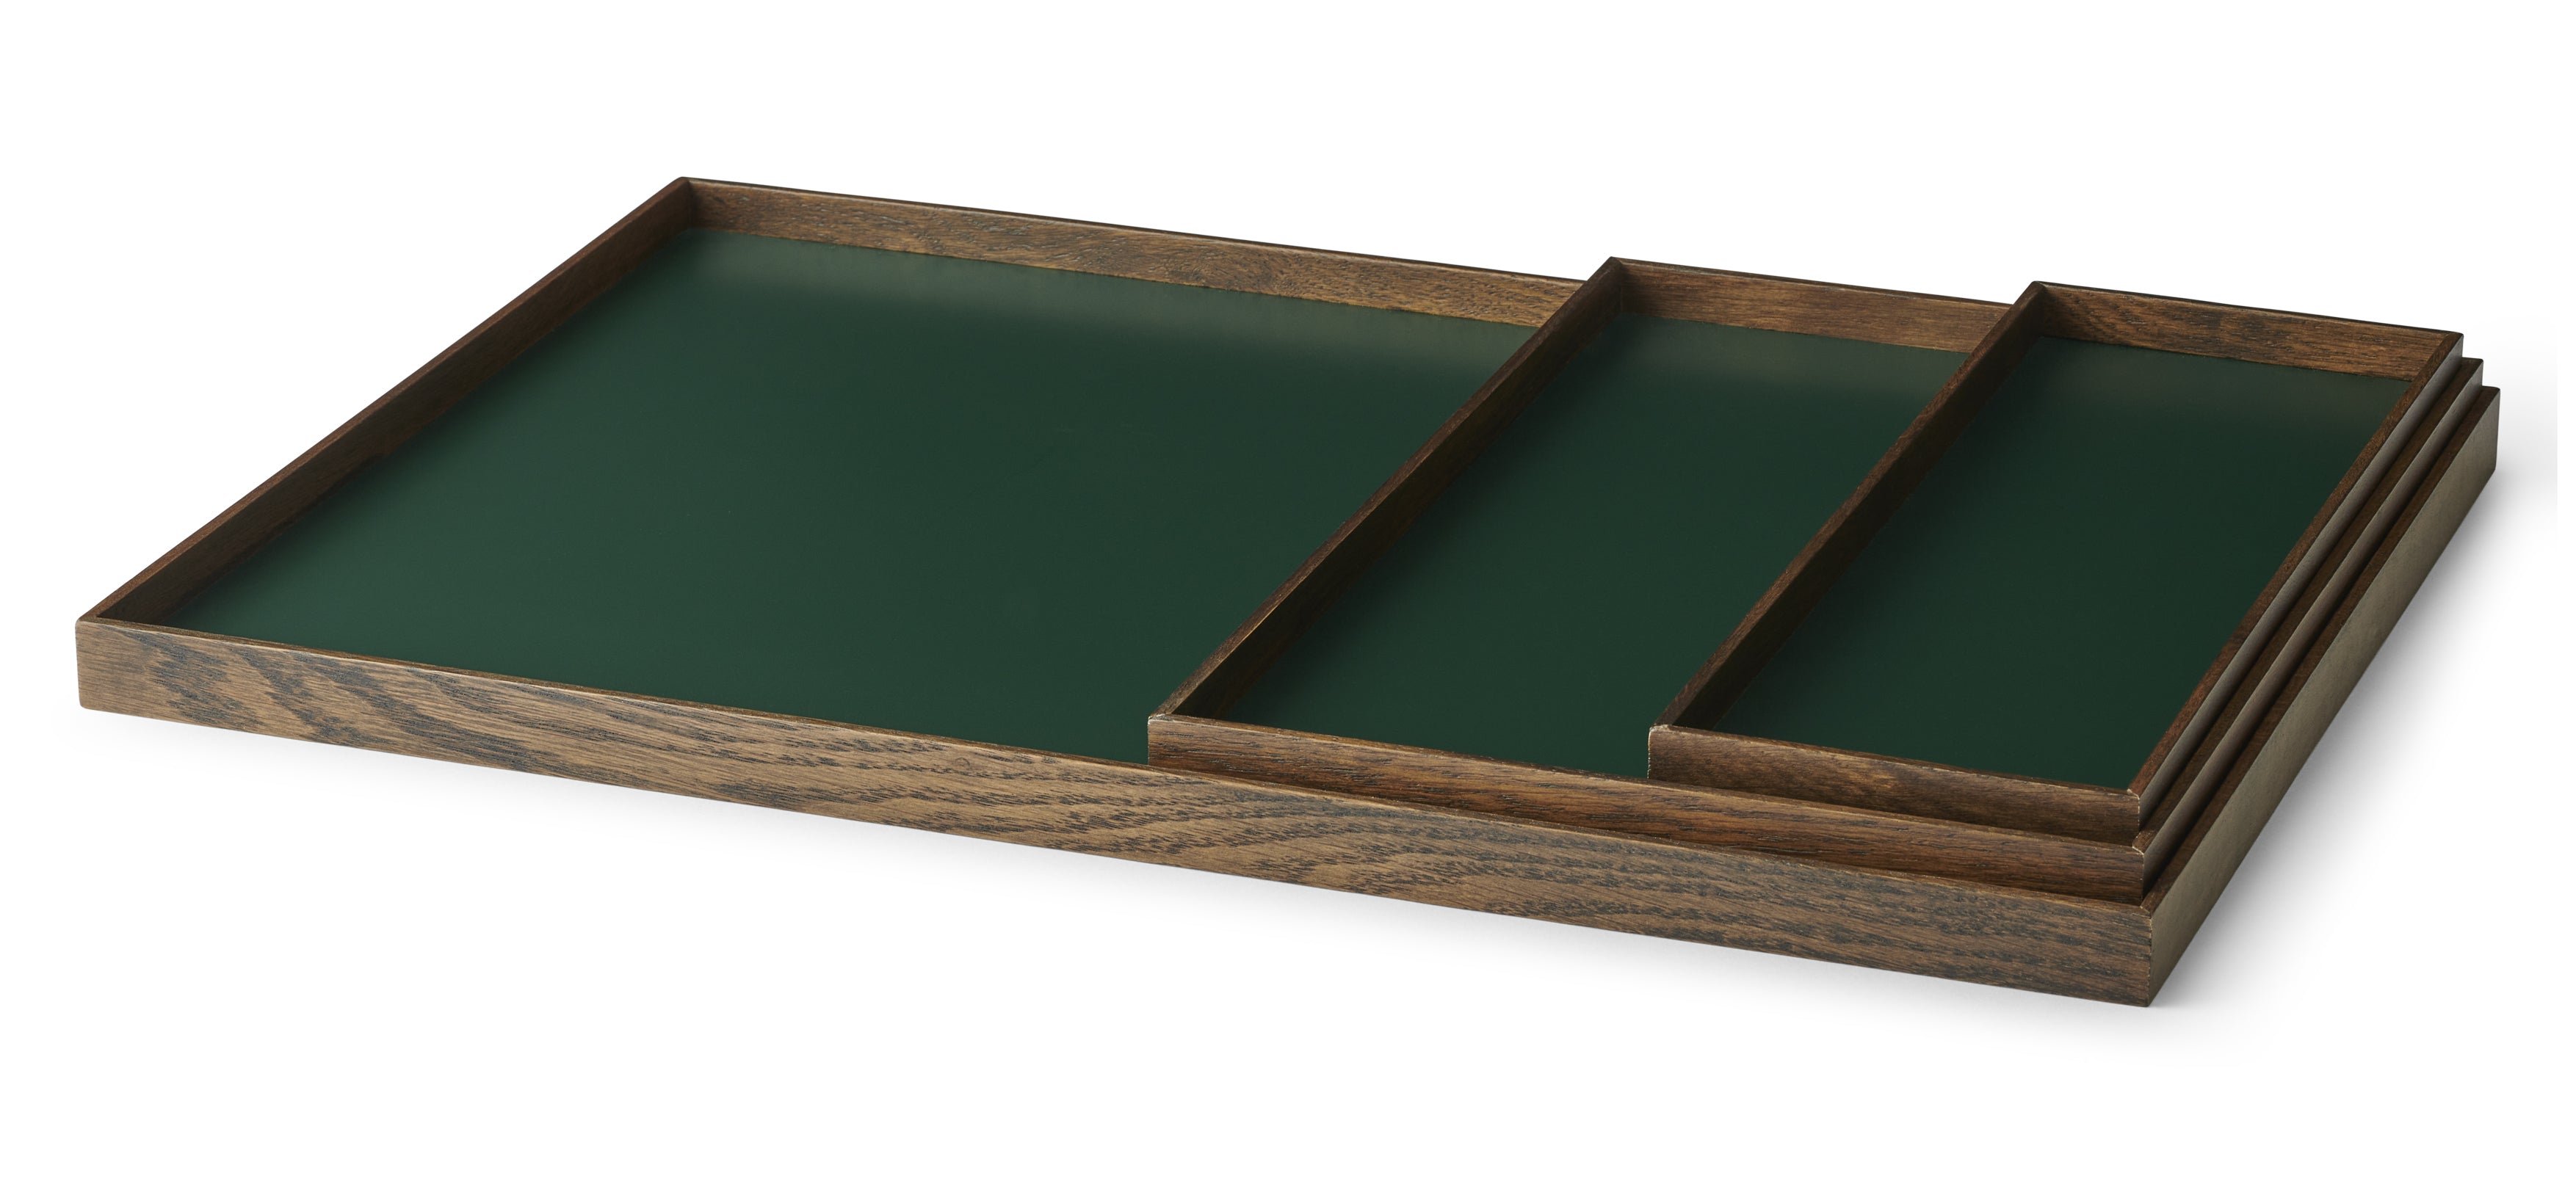 Gejst Frame Tray Smoked Oak/Green, Lille